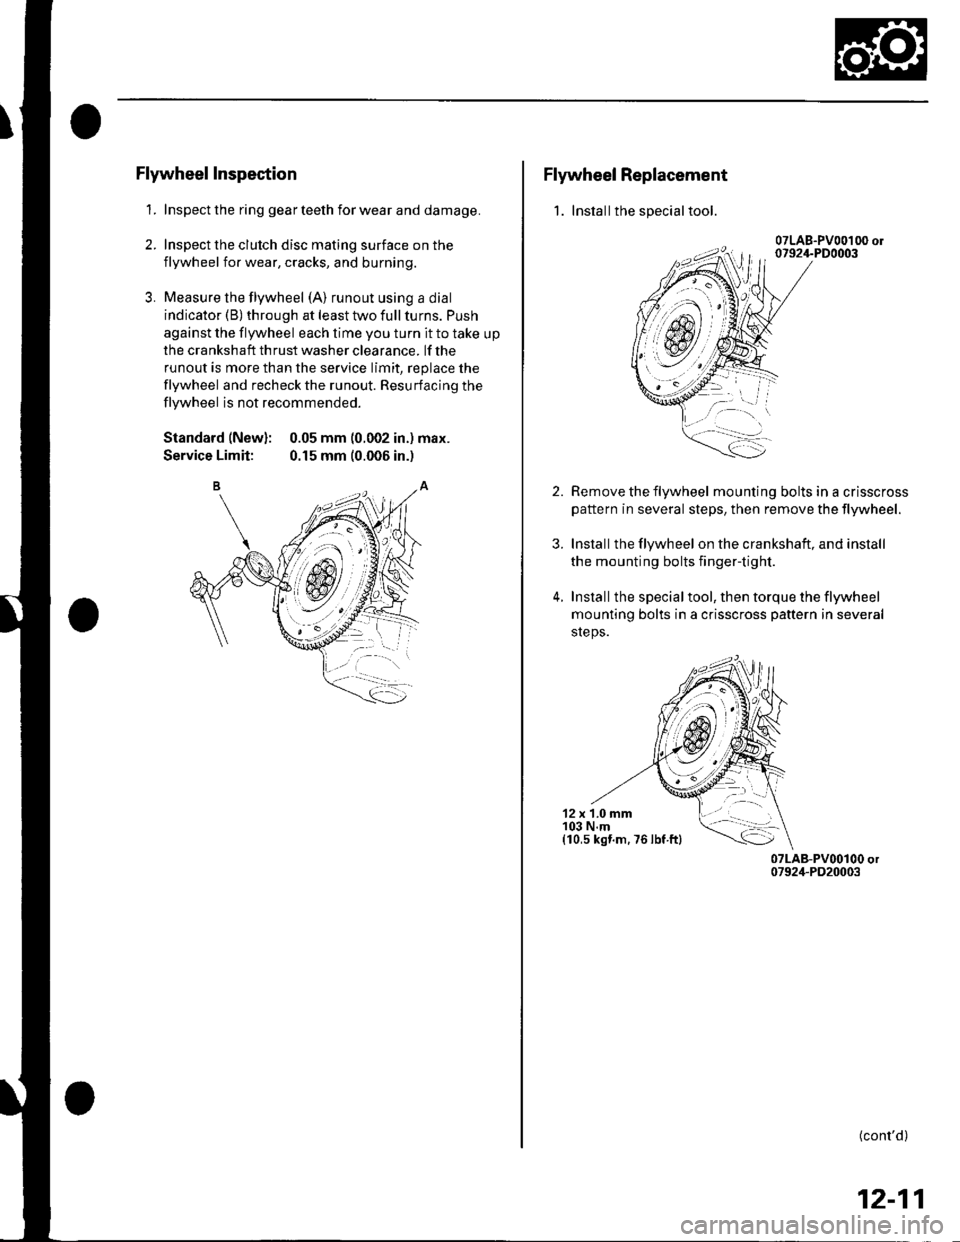 HONDA CIVIC 2003 7.G Owners Guide Flywheel Inspection
1. Inspect the ring gear teeth for wear and damage.
2. Inspect the clutch disc mating surface on the
flywheel for wear, cracks, and burning.
3. Measure the flywheel (A) runout usin